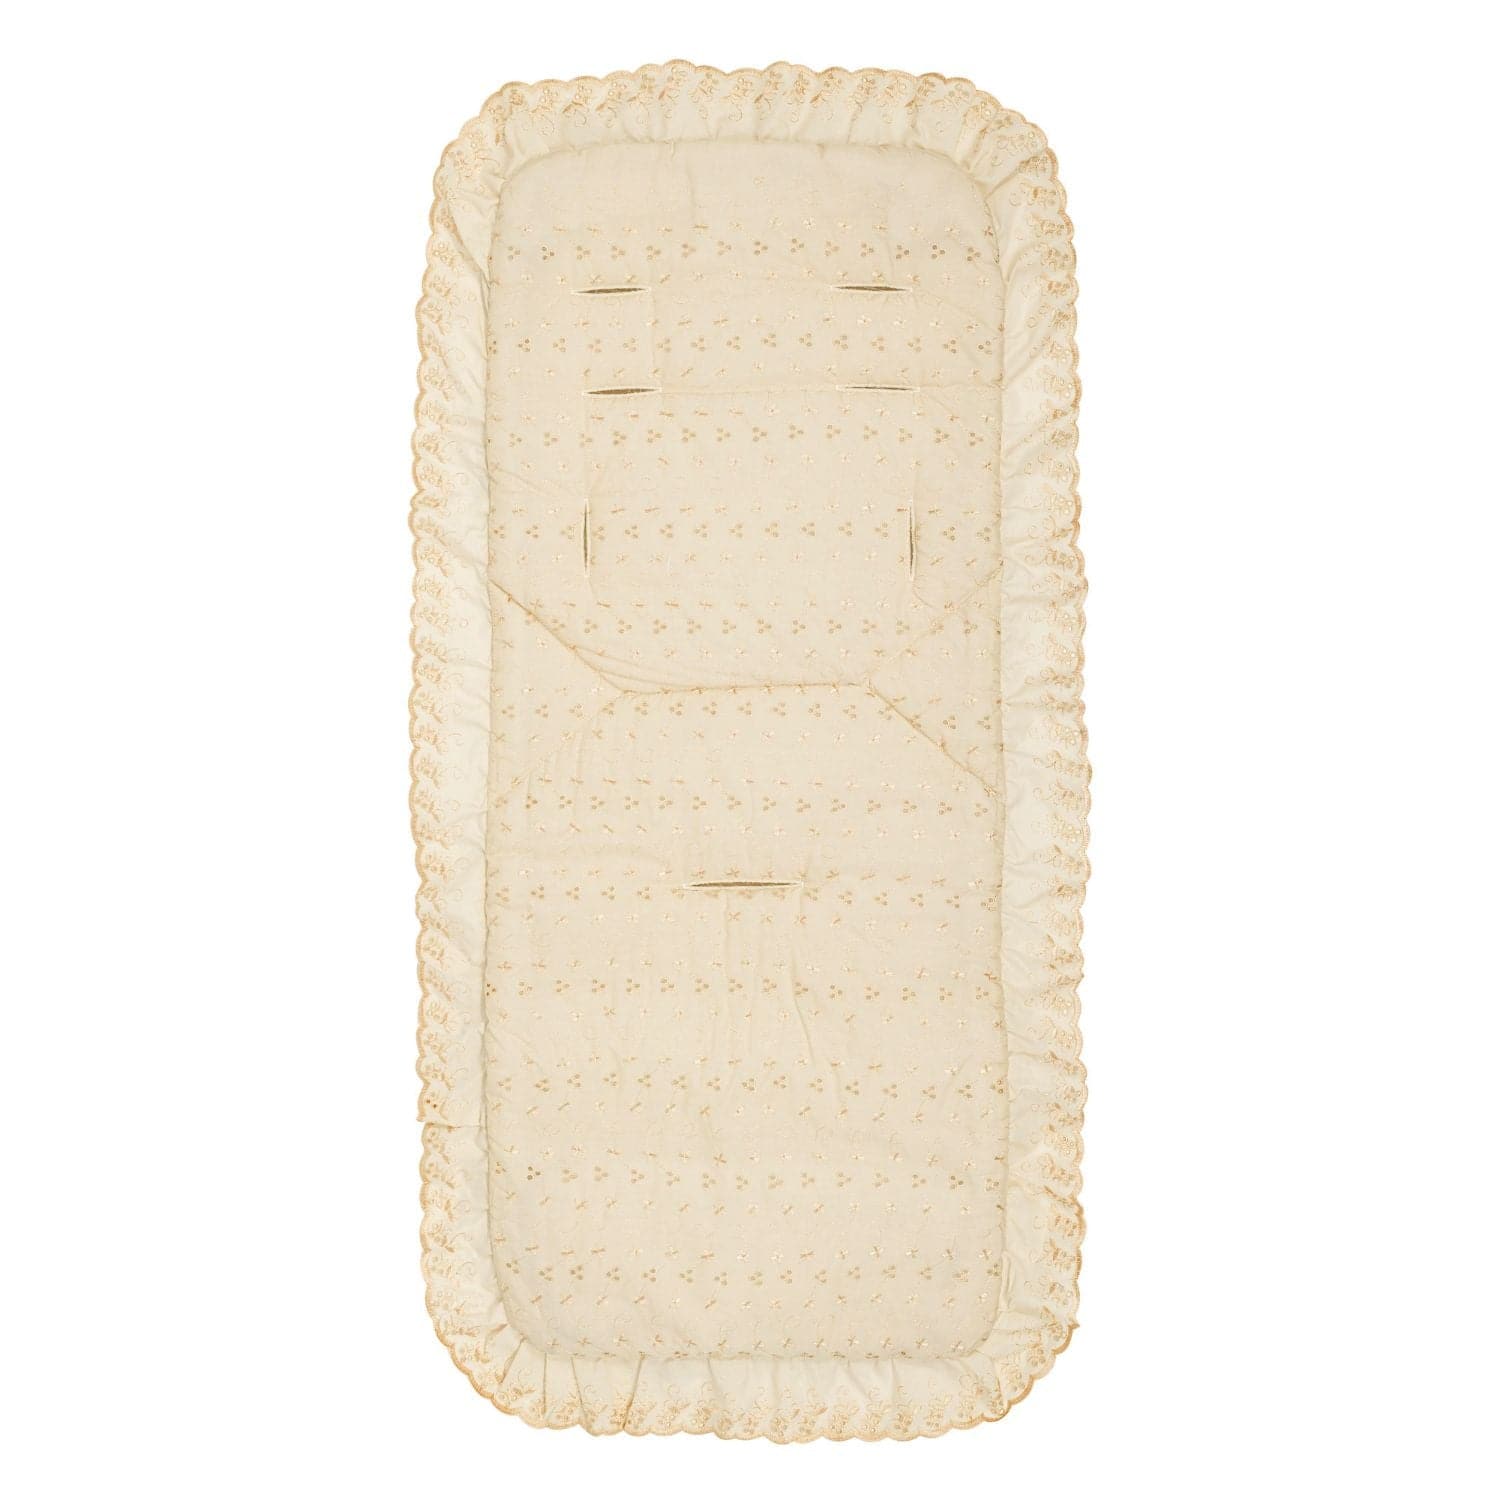 Broderie Anglaise Pushchair Seat Liner Compatible with Bebecar - Fits All Models - For Your Little One